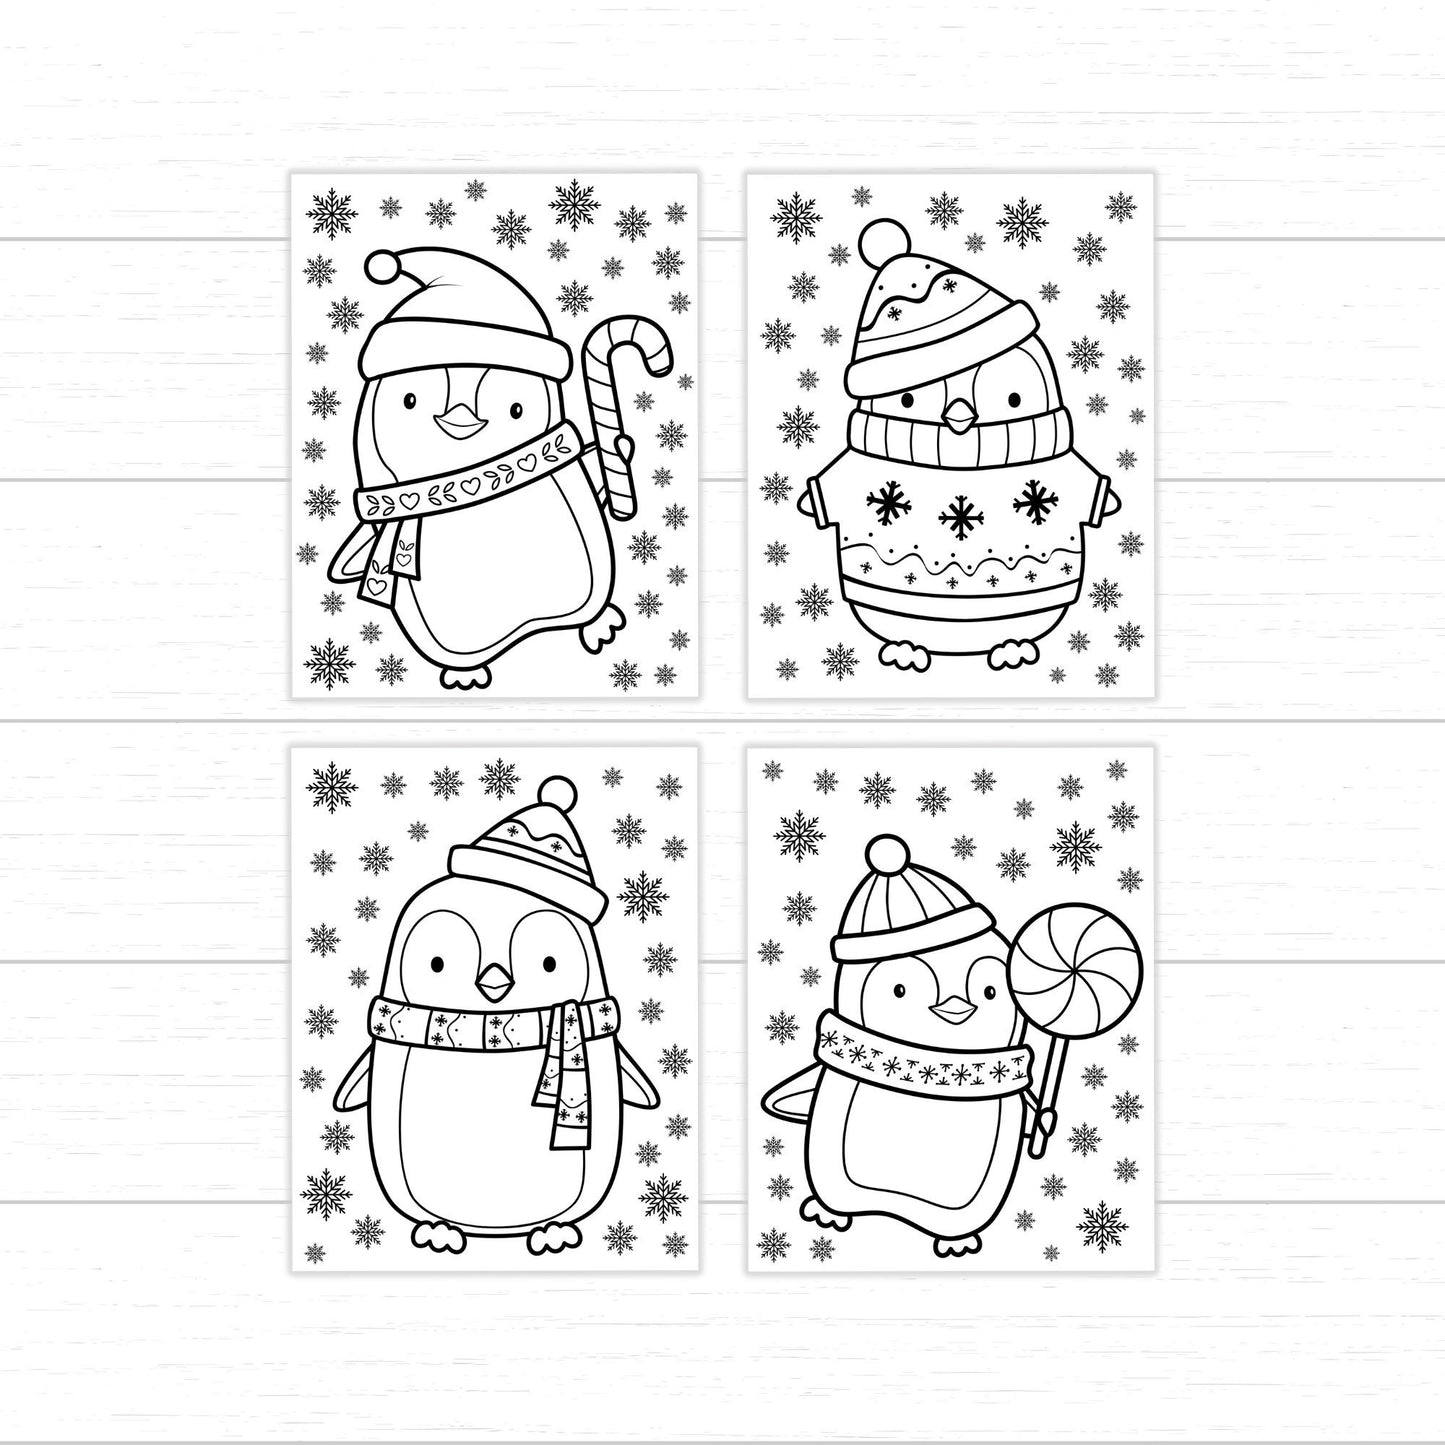 Christmas Penguin Coloring Pages, Winter Penguin Coloring Pages, Penguin Coloring Pages, Christmas Coloring Pages, Winter Coloring Pages